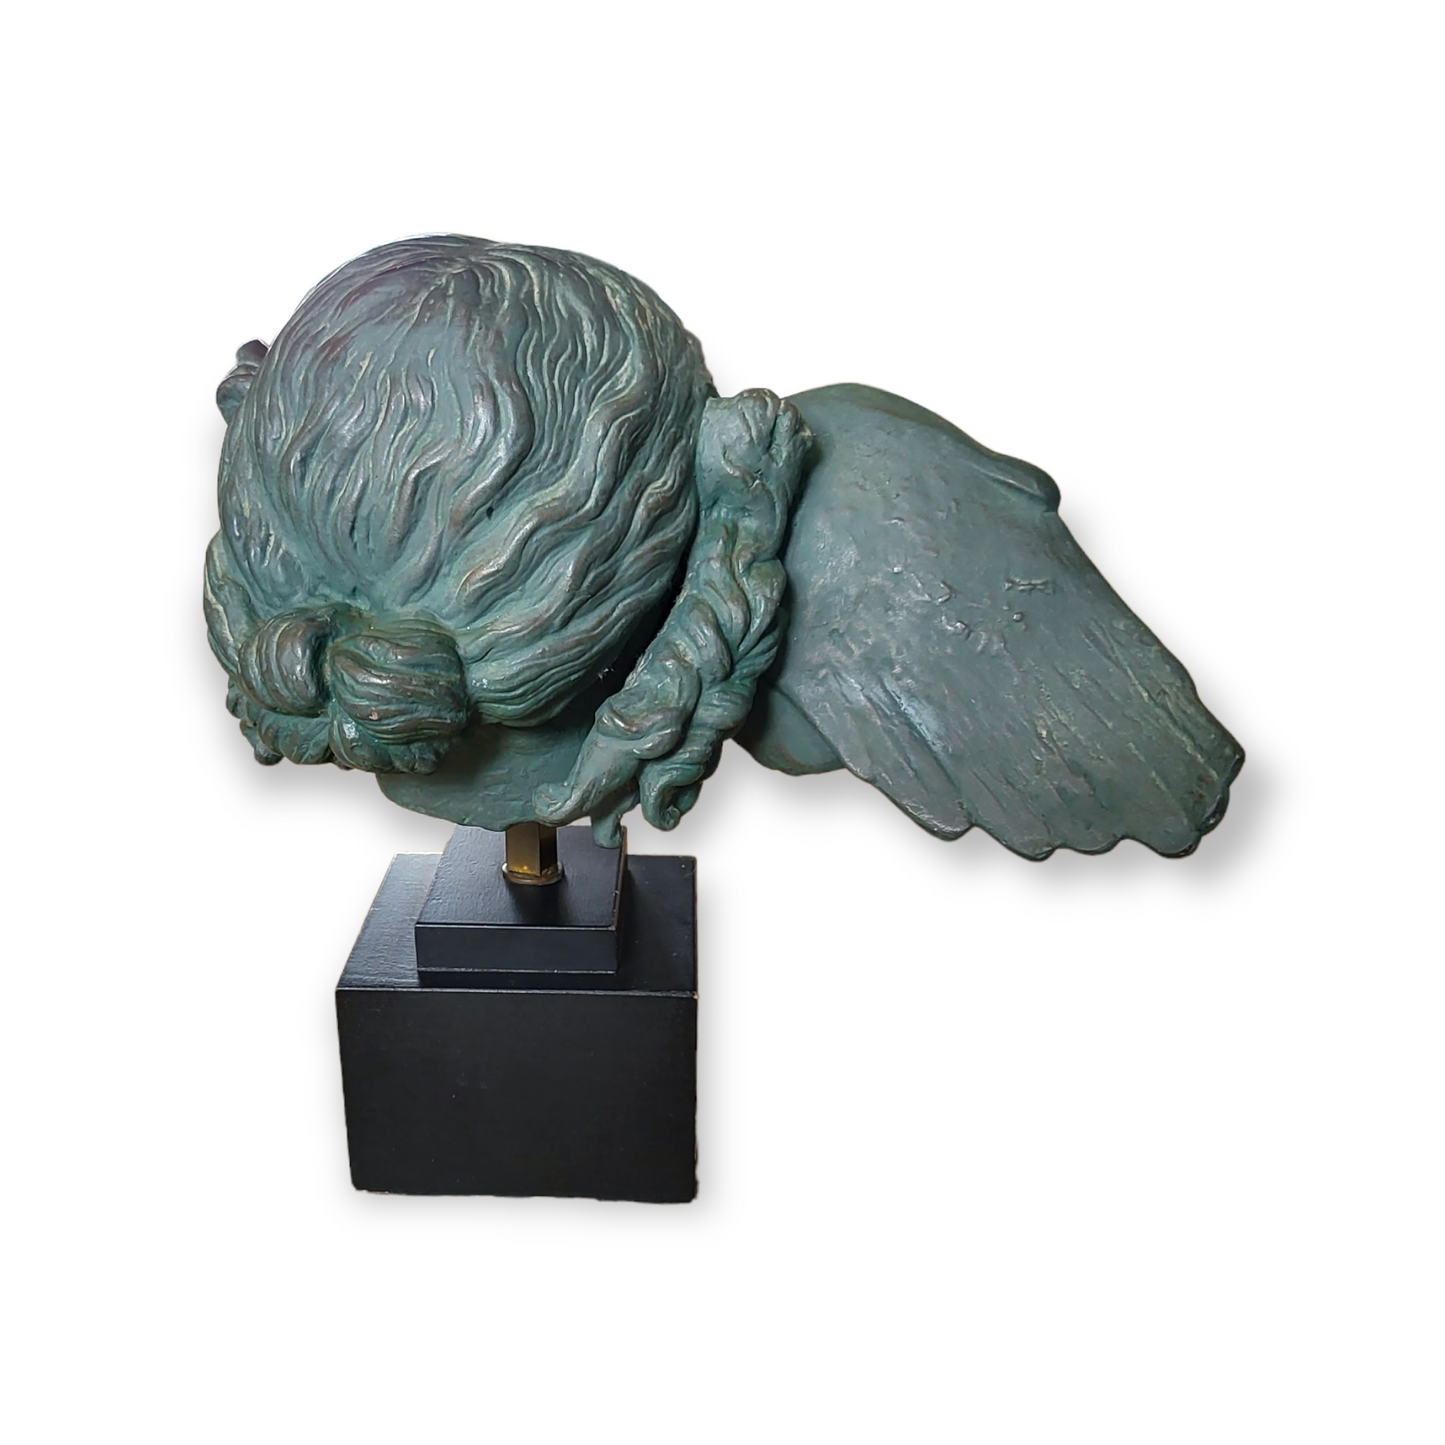 Vintage Replica of Hypnos Bust from the British Museum